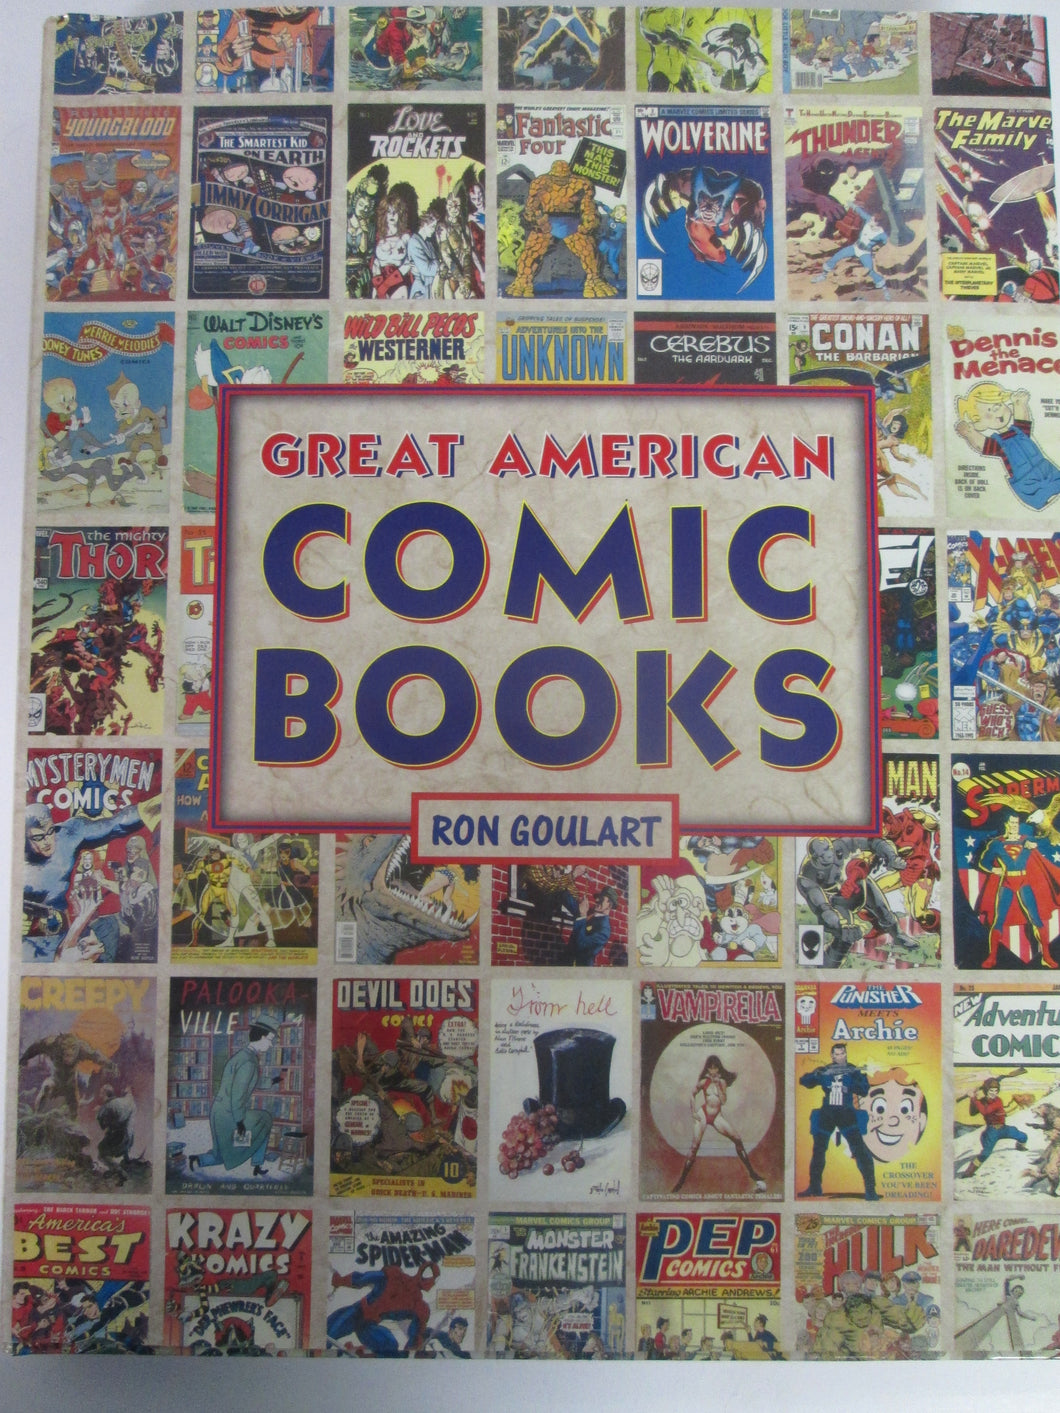 Great American Comic Books by Ron Goulart HC 2001